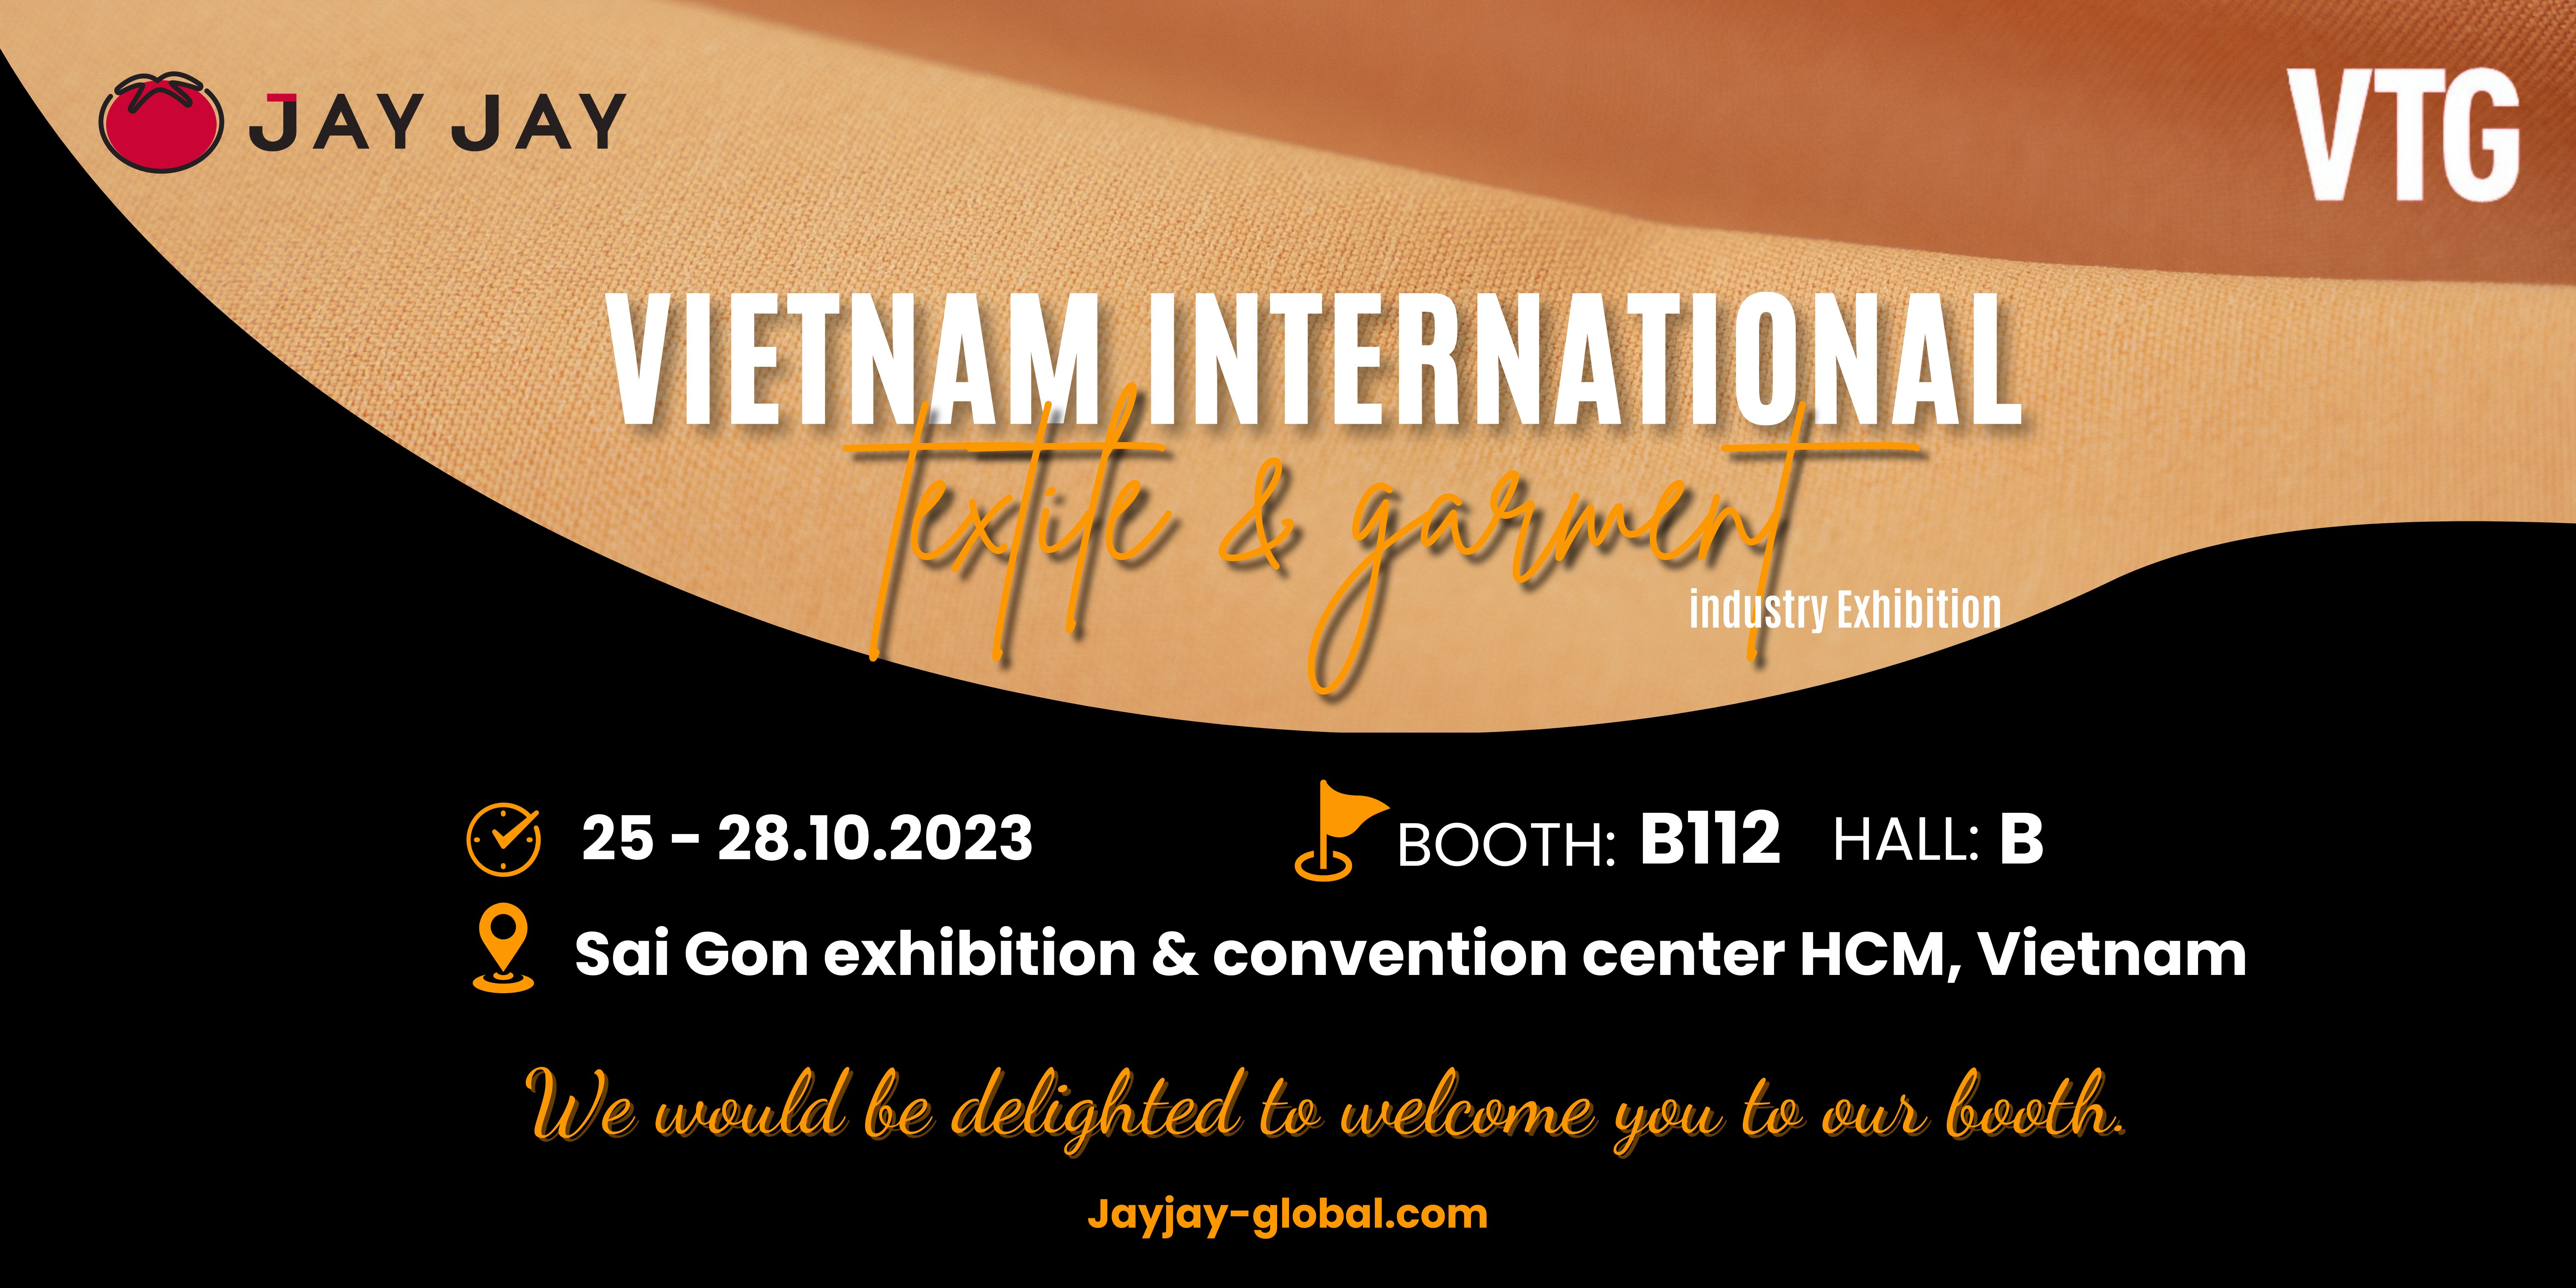 Invitation to customers to visit the Jay Jay Vina booth (B112) at the VTG 2023 exhibition